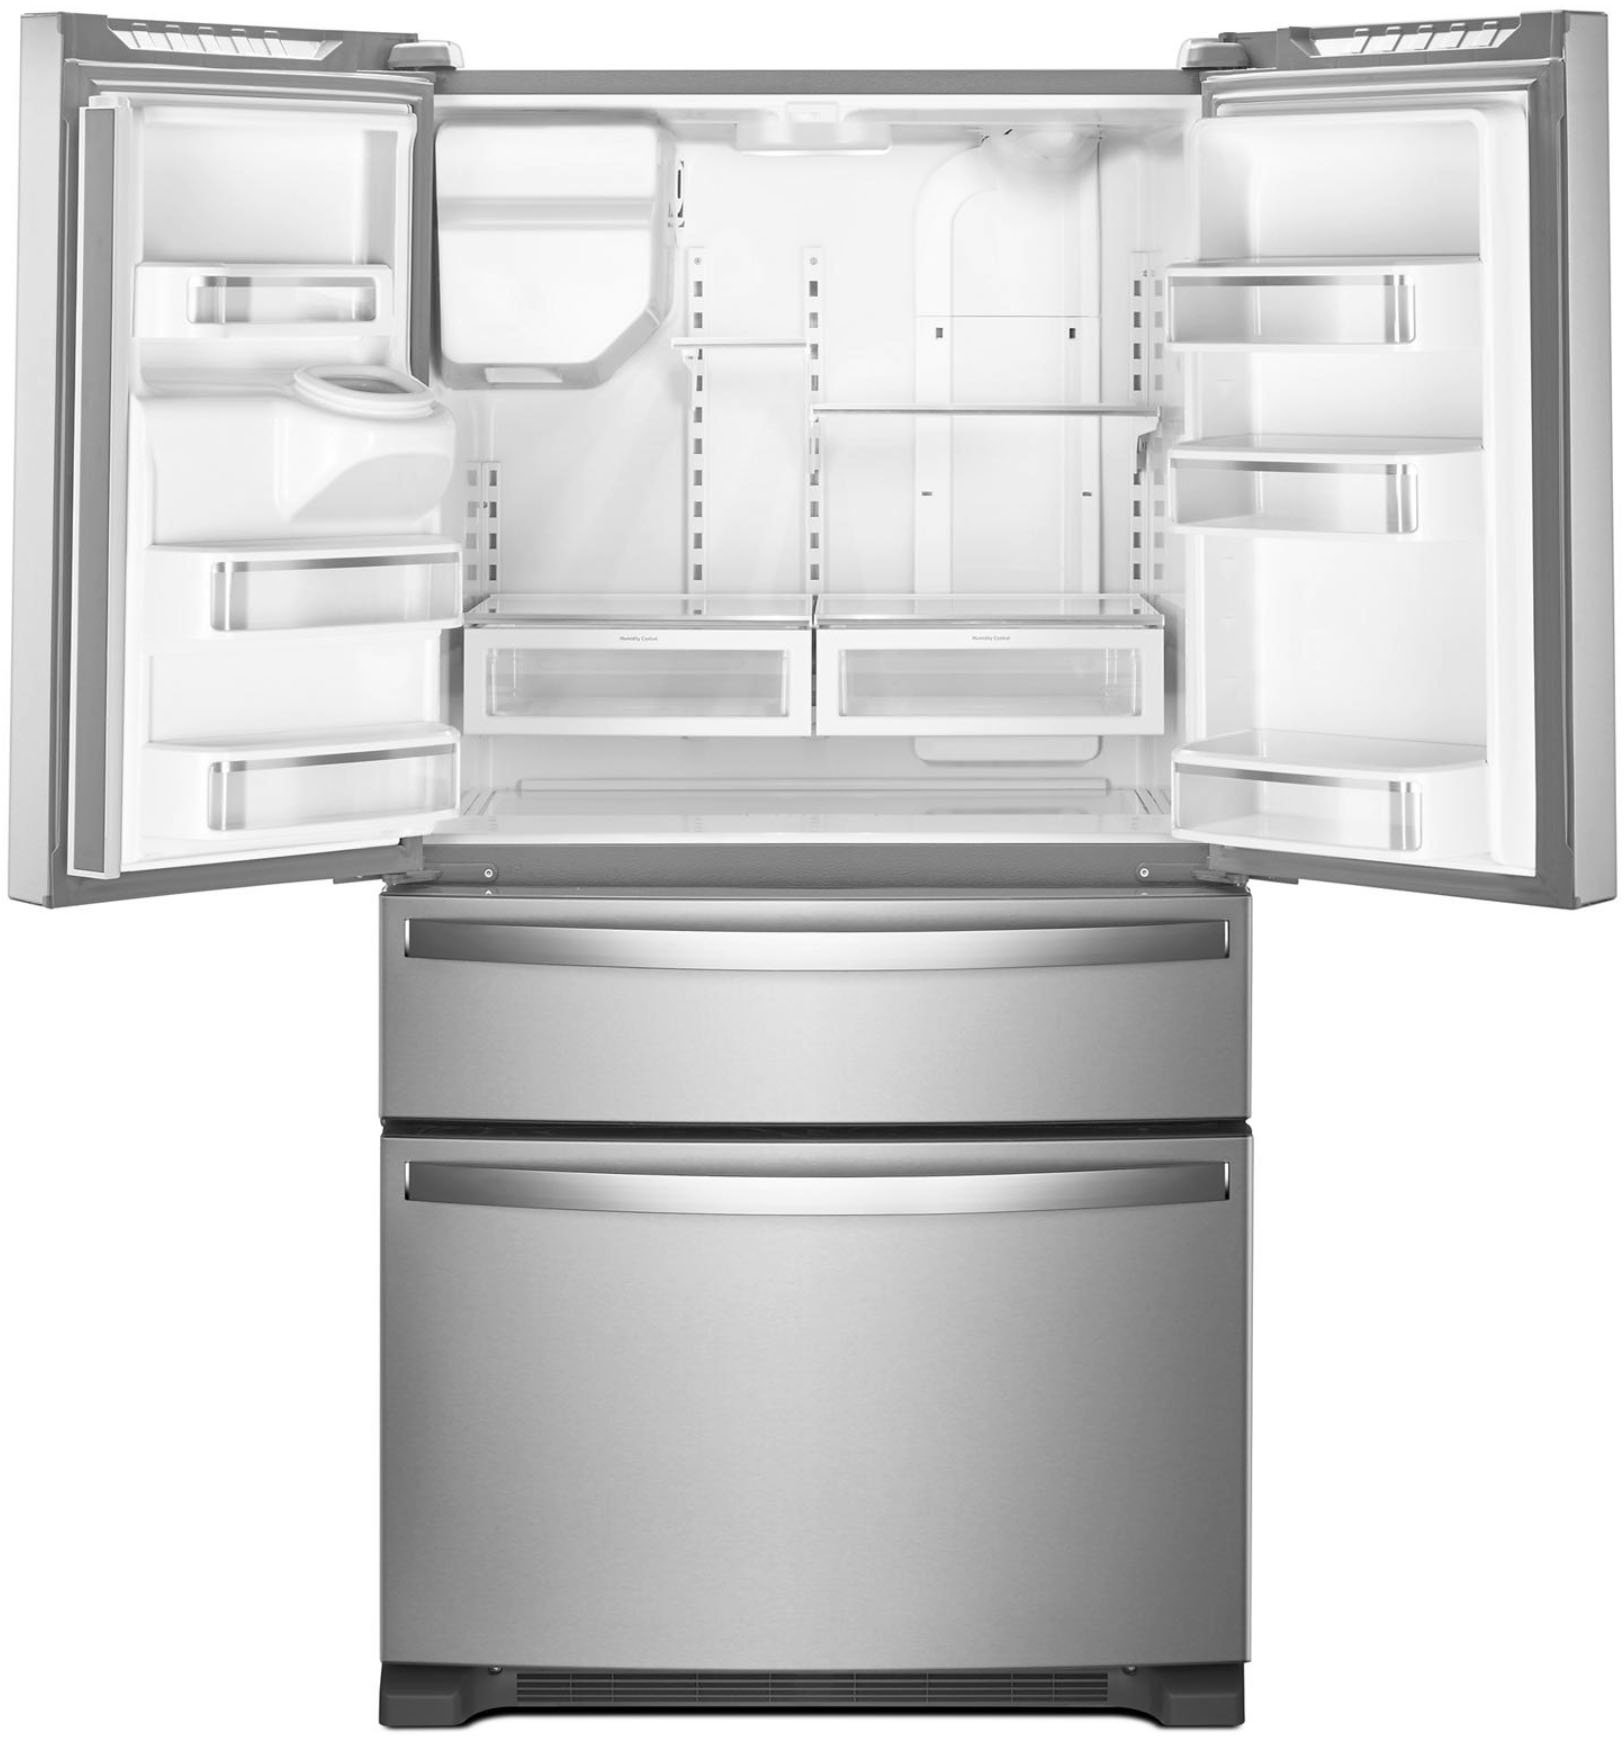 Angle View: GE - 25.4 Cu. Ft. Side-by-Side Refrigerator - High gloss bisque